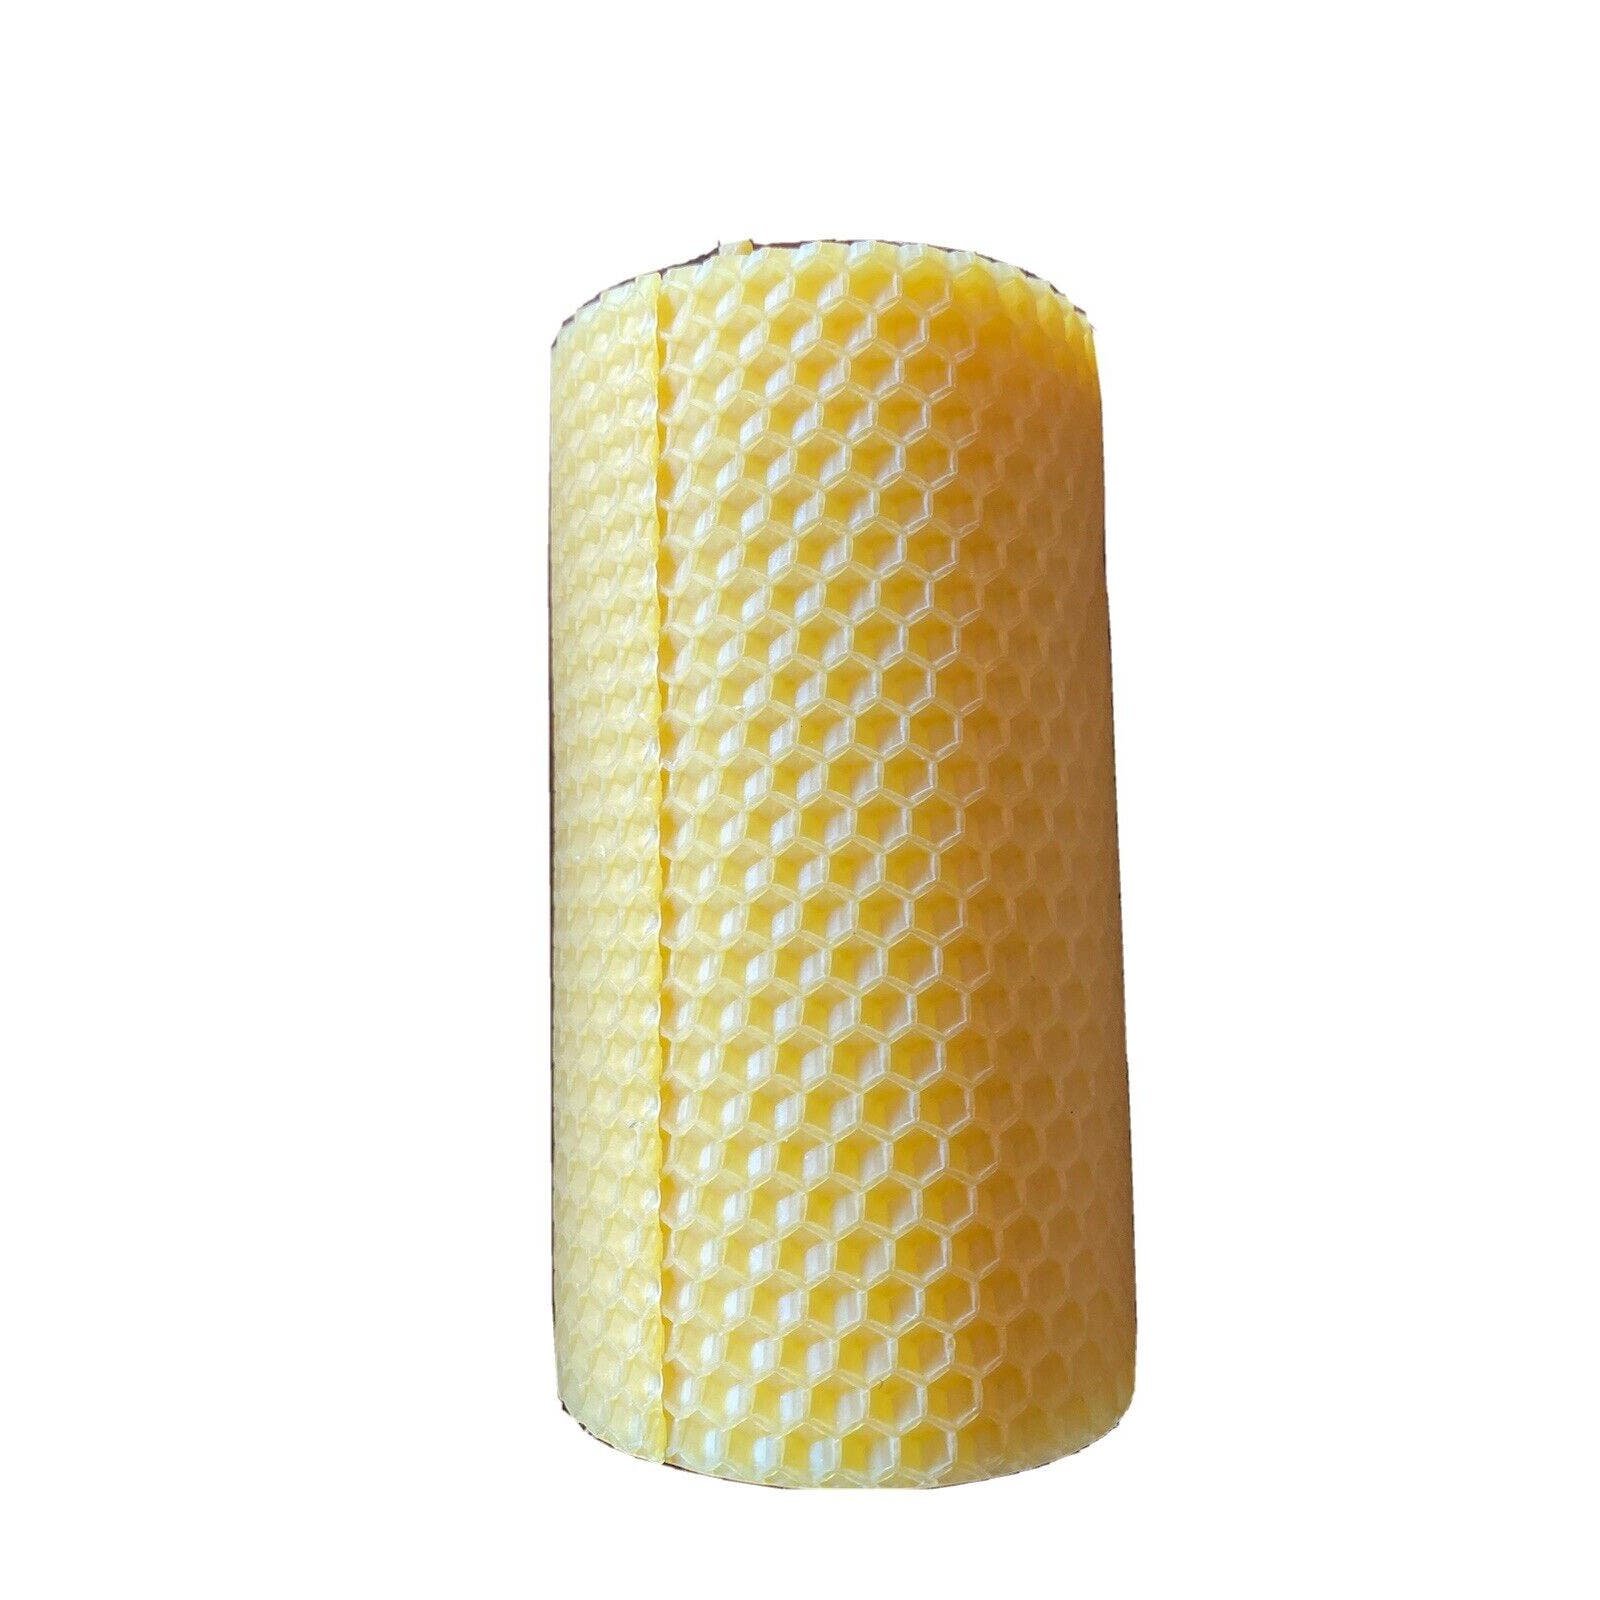 Beeswax Candle Pillar 6.1 X 2.75 inches New!!! HHxmfljf9